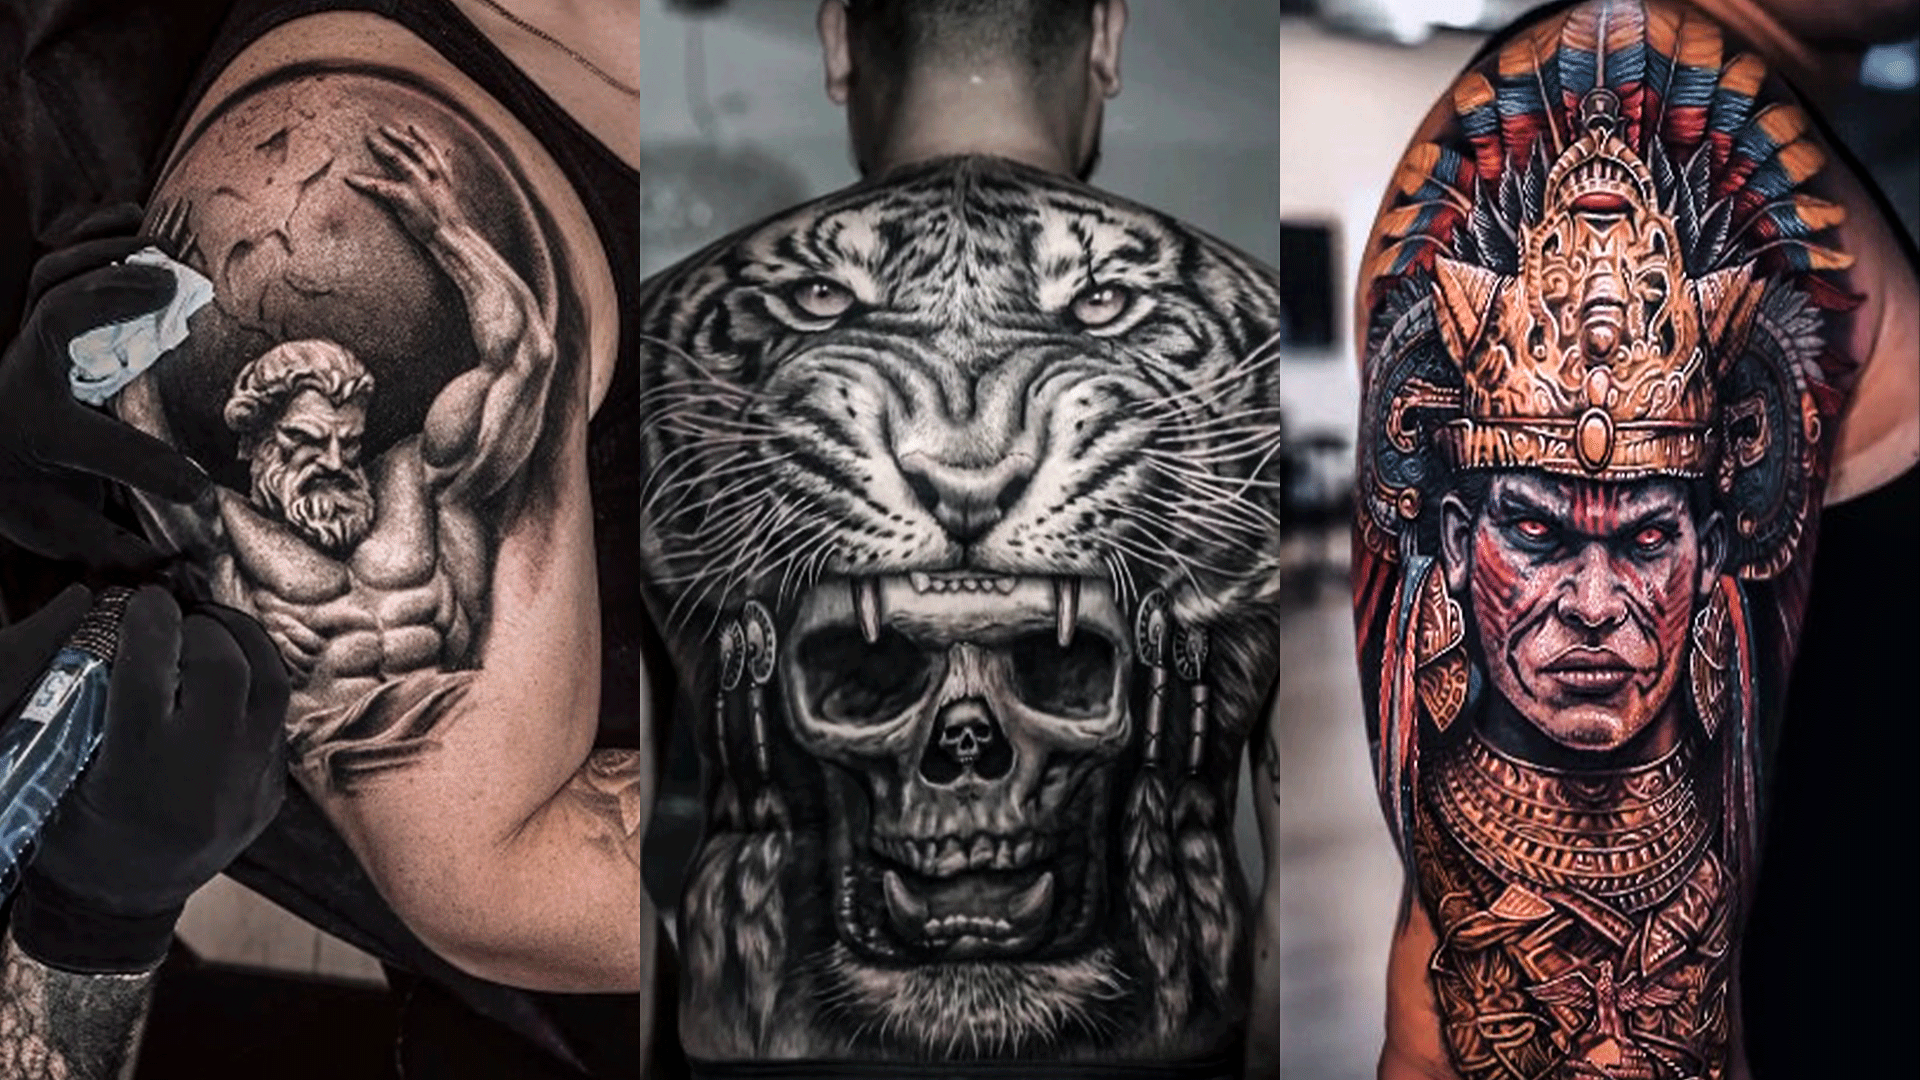 Tattoos by myttoos.com - Guys...what do u think about this epic chest  piece? | Facebook